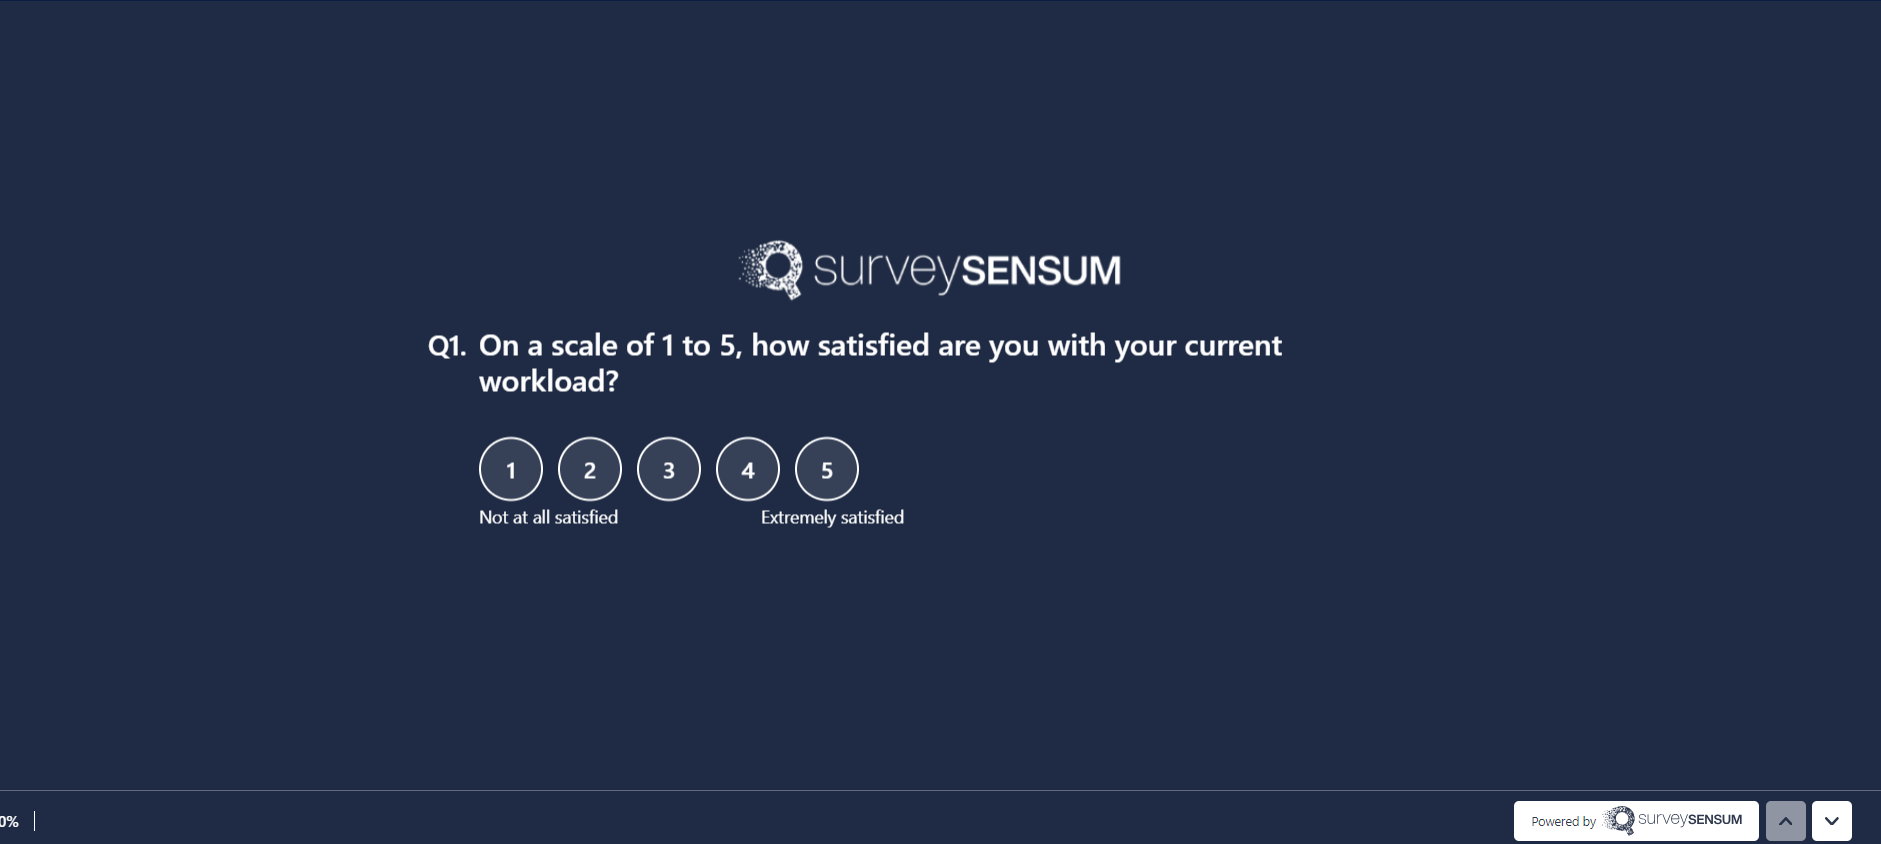  The image shows a question example for the employee engagement surveys offered by SurveySensum. 